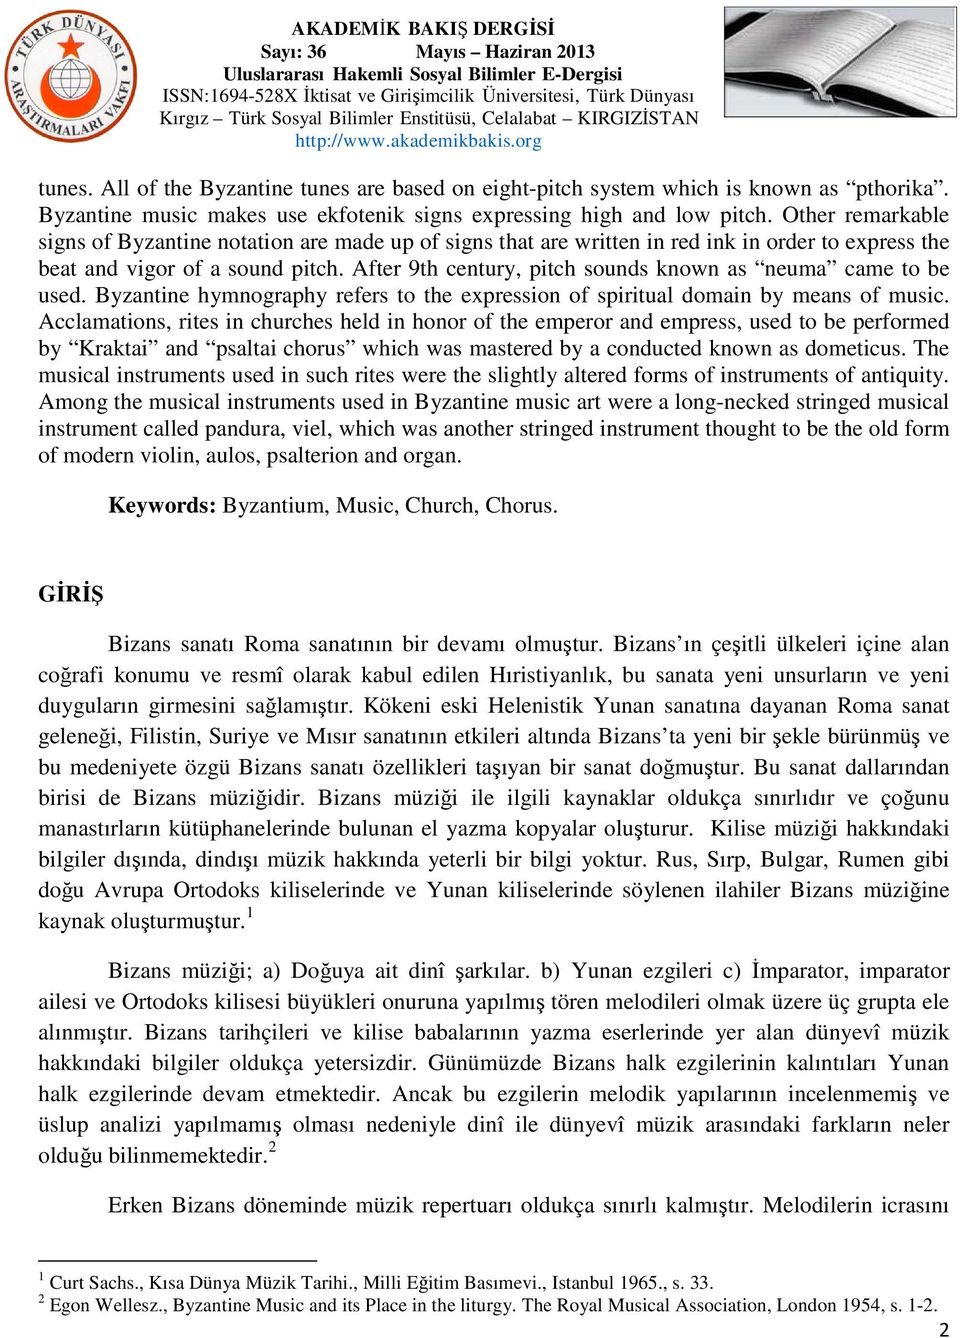 After 9th century, pitch sounds known as neuma came to be used. Byzantine hymnography refers to the expression of spiritual domain by means of music.